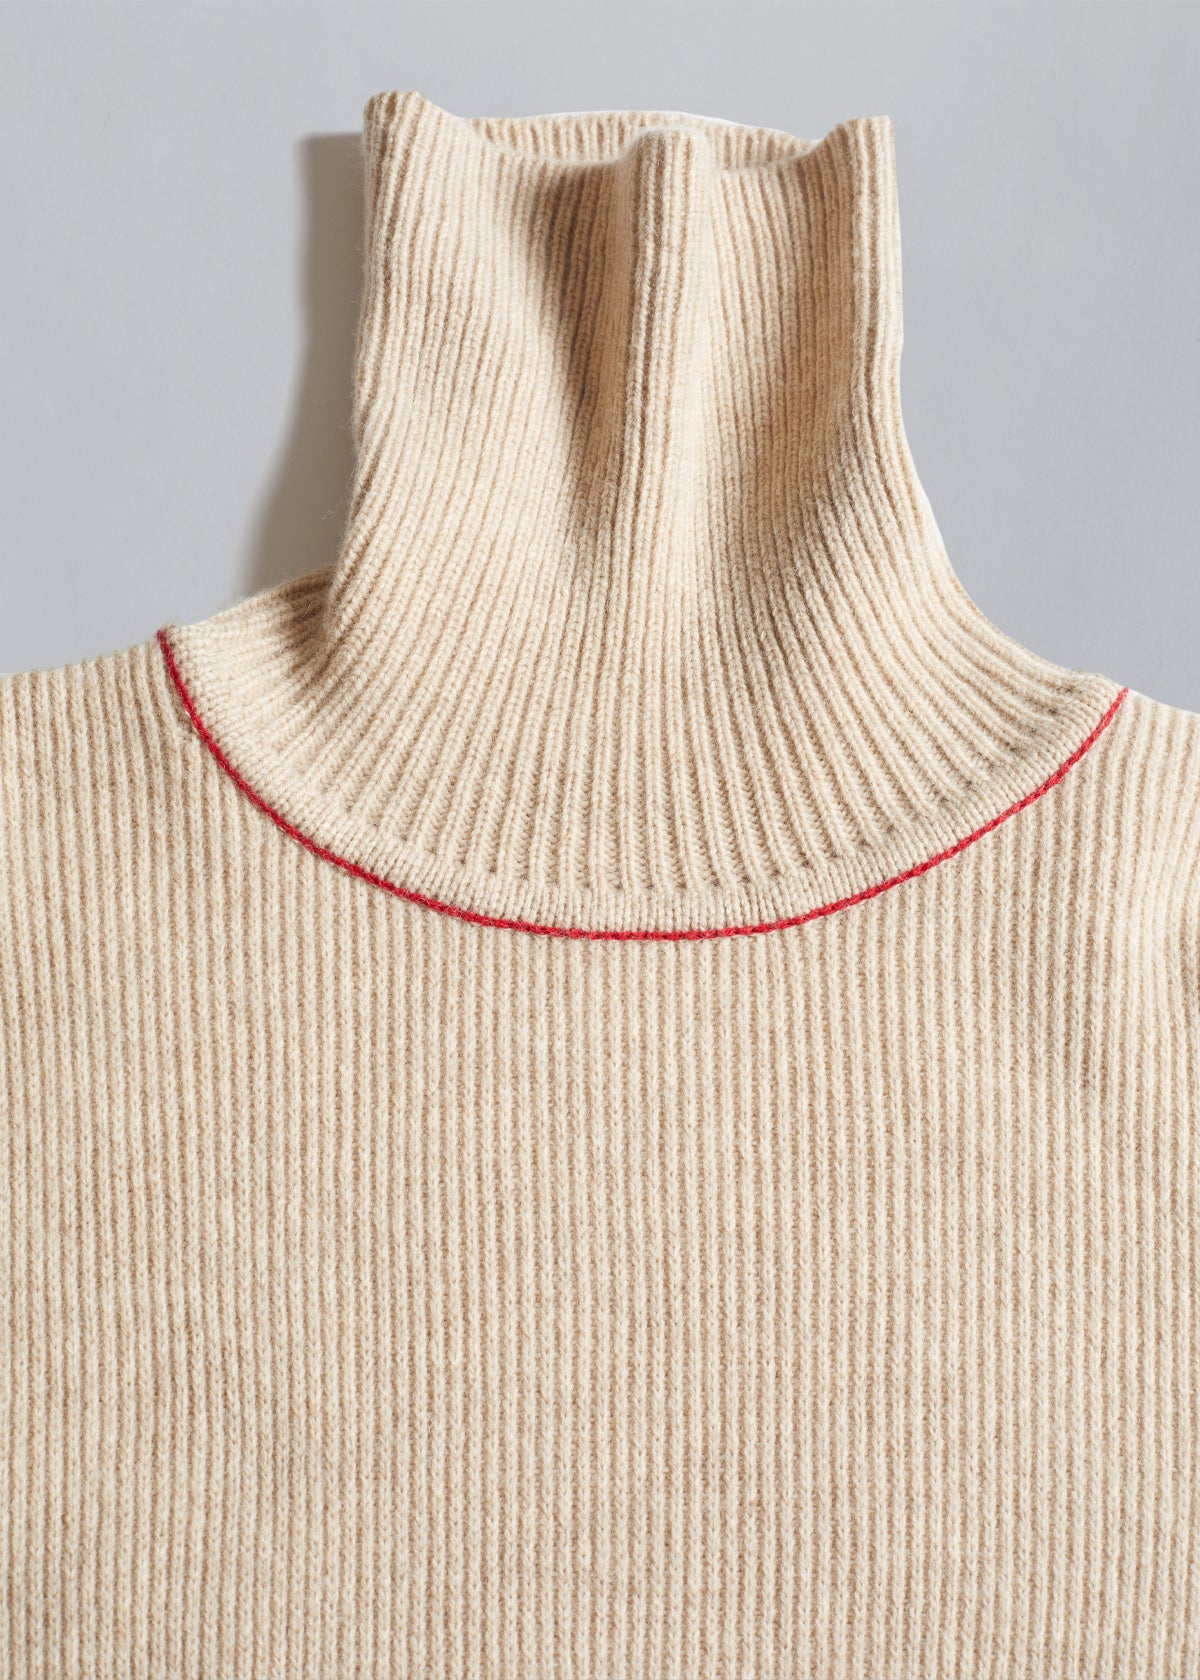 Natural Wool Turtleneck Knit 2000's - Large - The Archivist Store